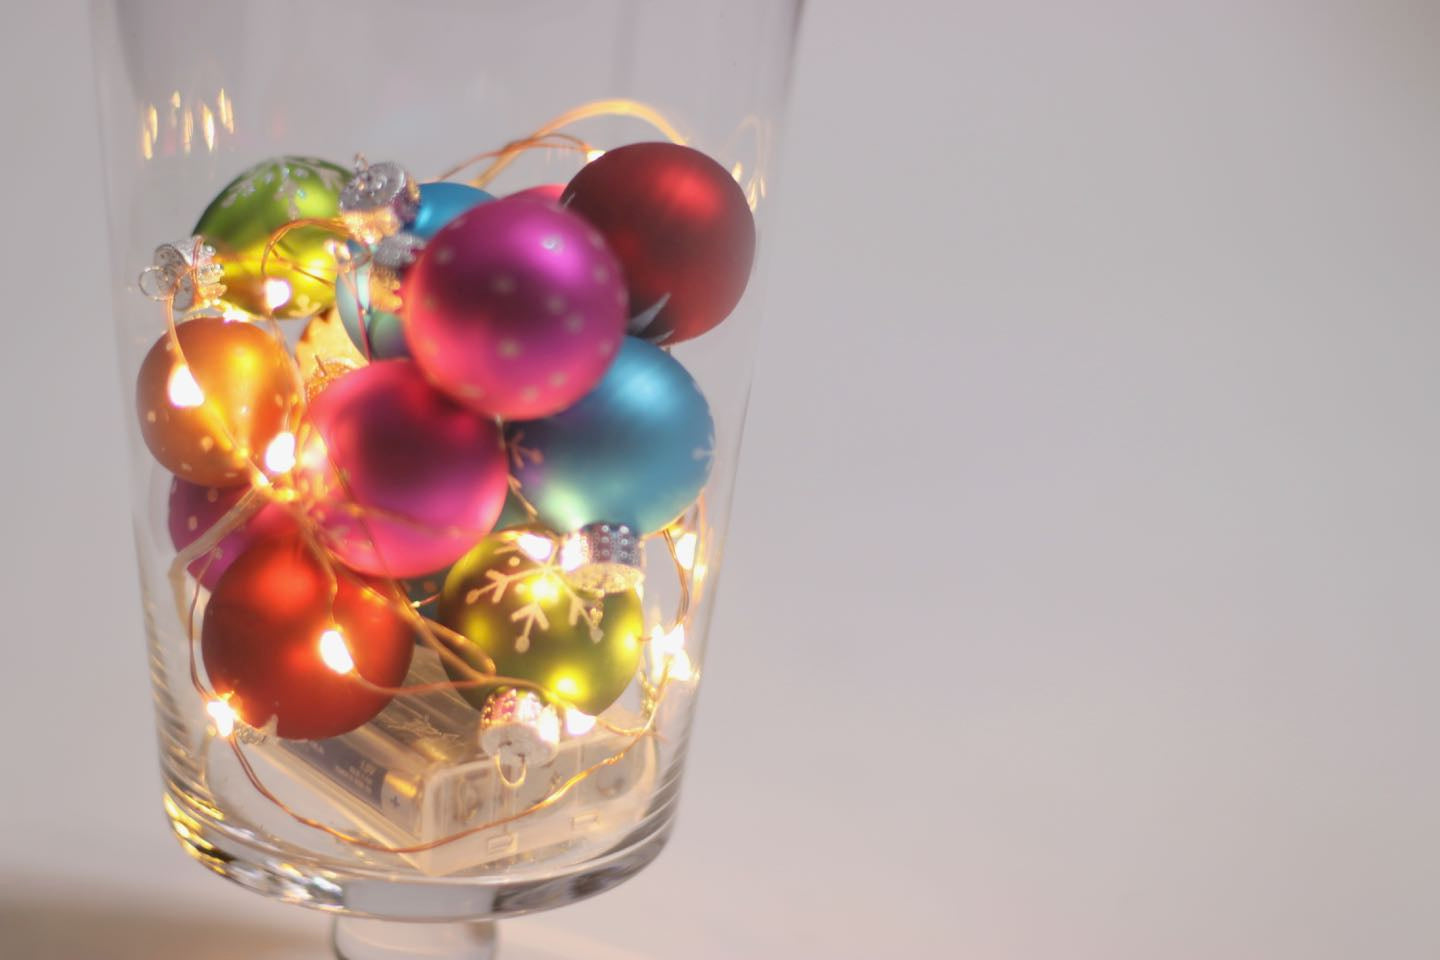 Christmas Ornaments and Lights - Simply Beautiful